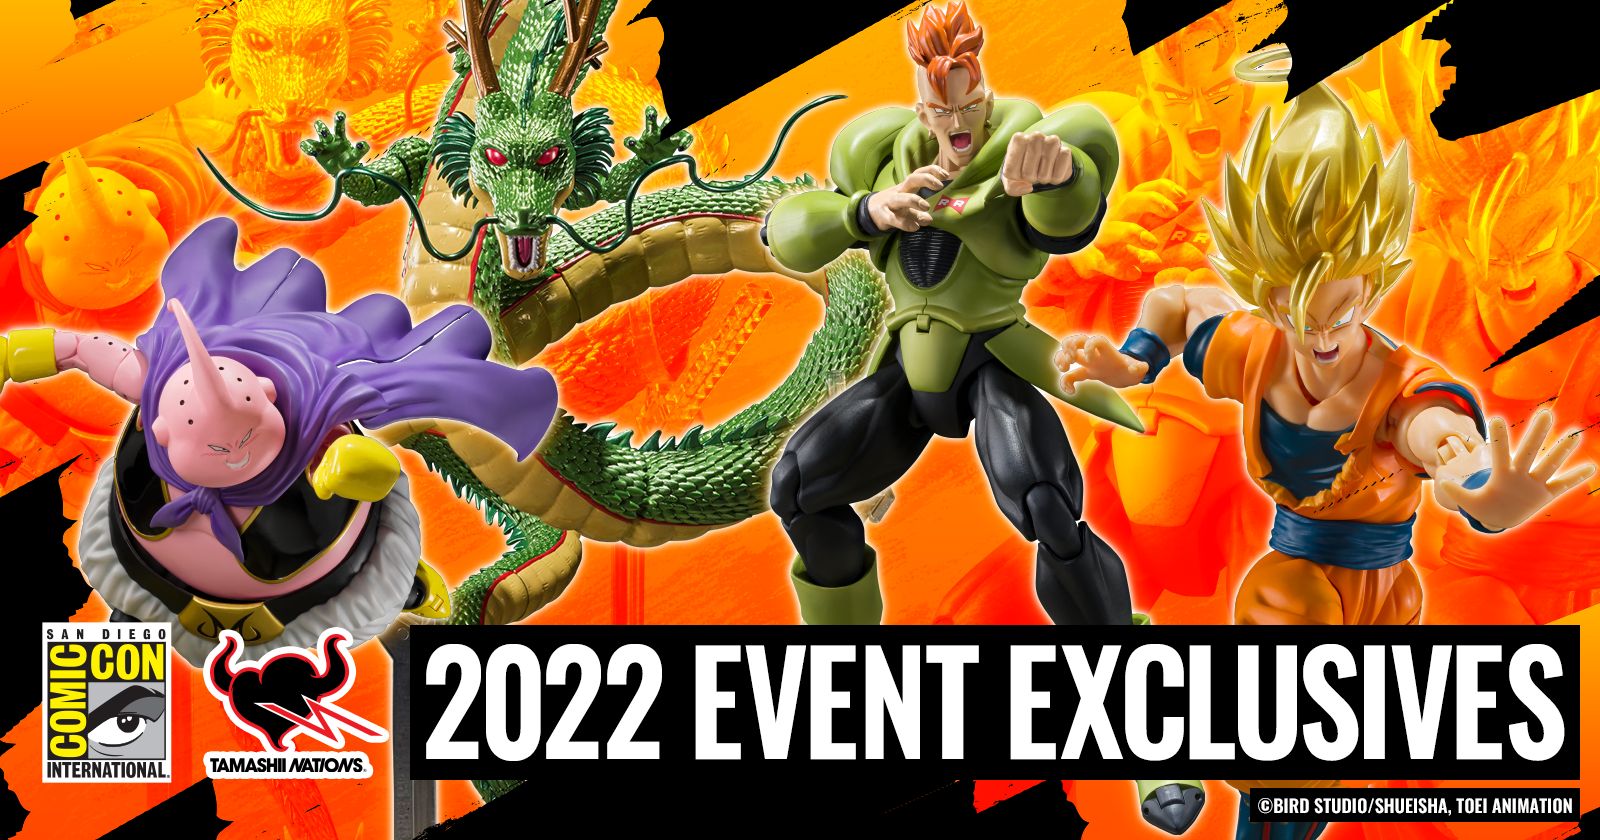 [North America Info] New Exclusive Items from TAMASHII NATIONS Coming to Comic-Con International San Diego!